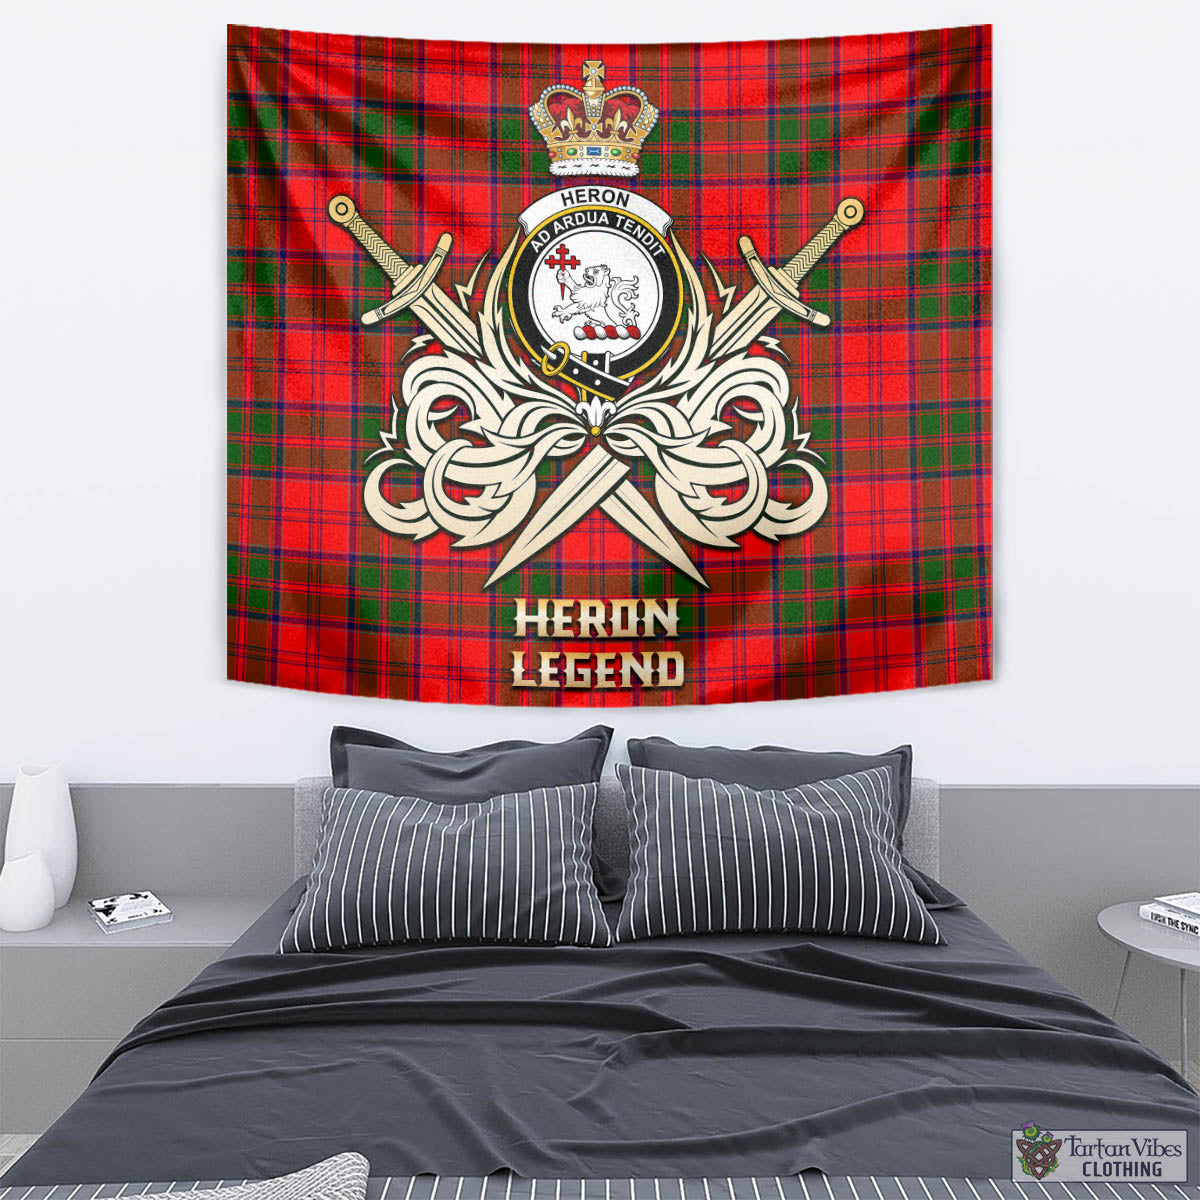 Tartan Vibes Clothing Heron Tartan Tapestry with Clan Crest and the Golden Sword of Courageous Legacy